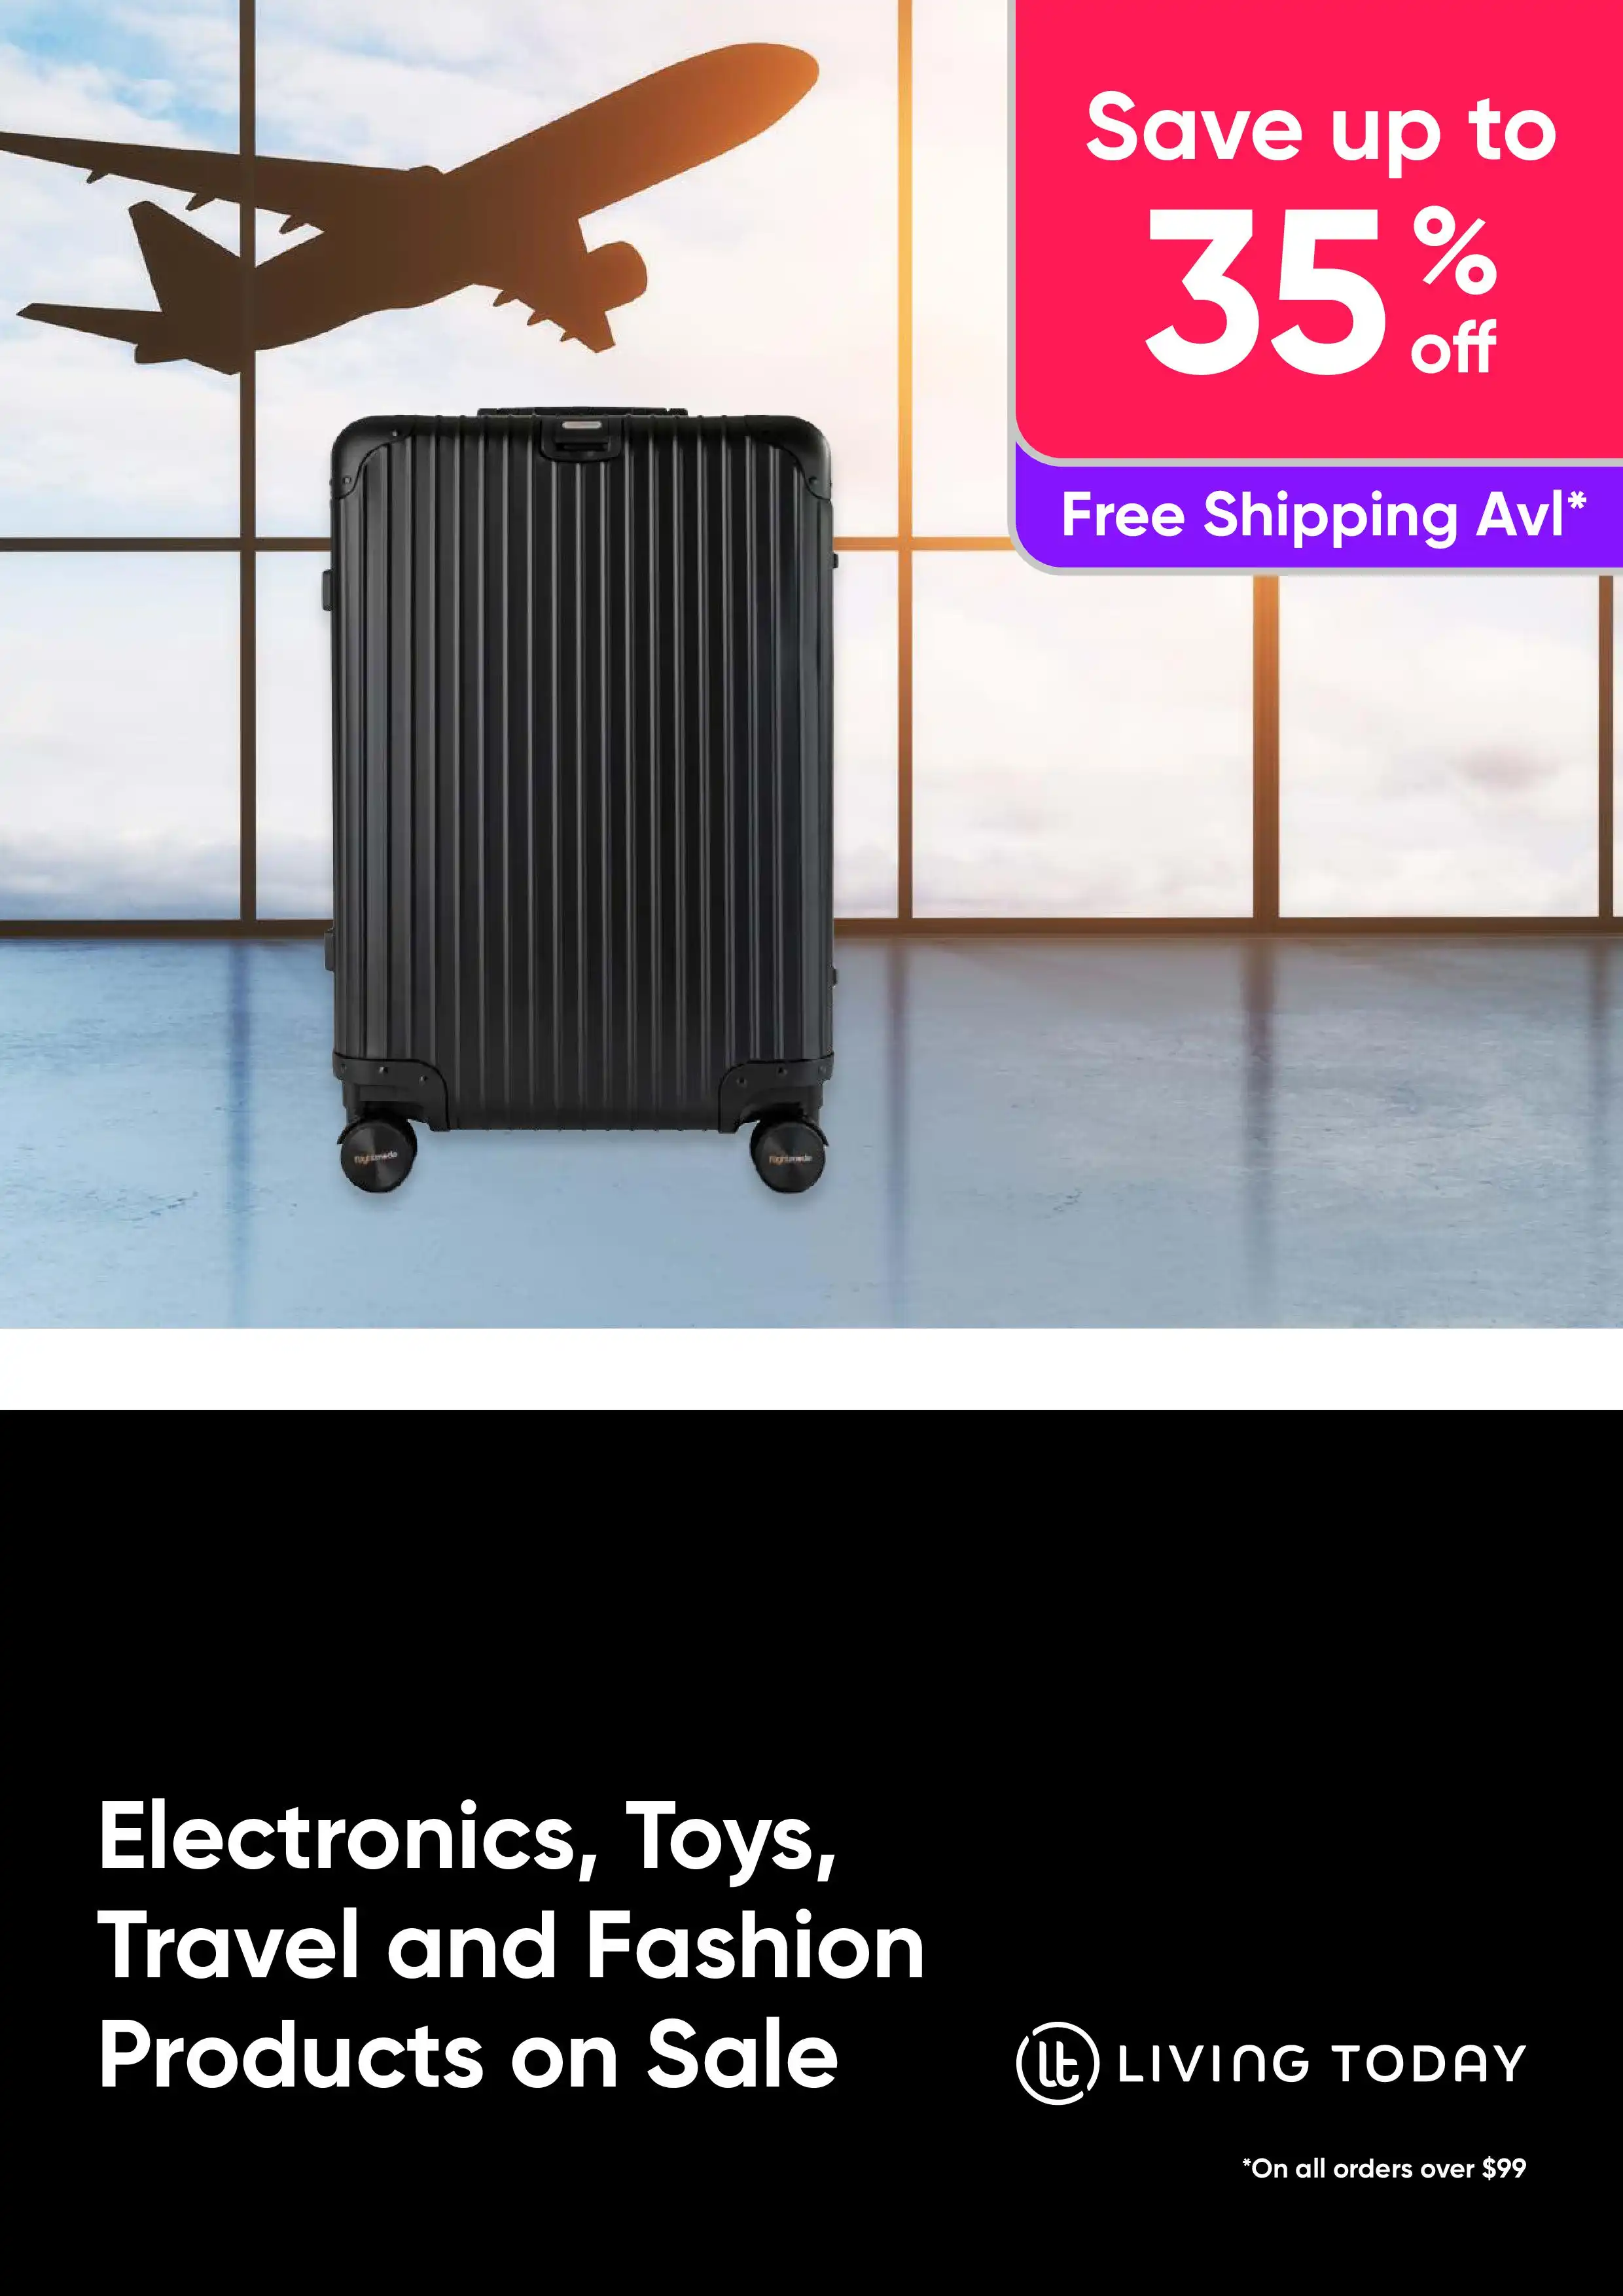 Electronics, Toys, Travel and Fashion Products on Sale - Save Up To 35% Off RRP